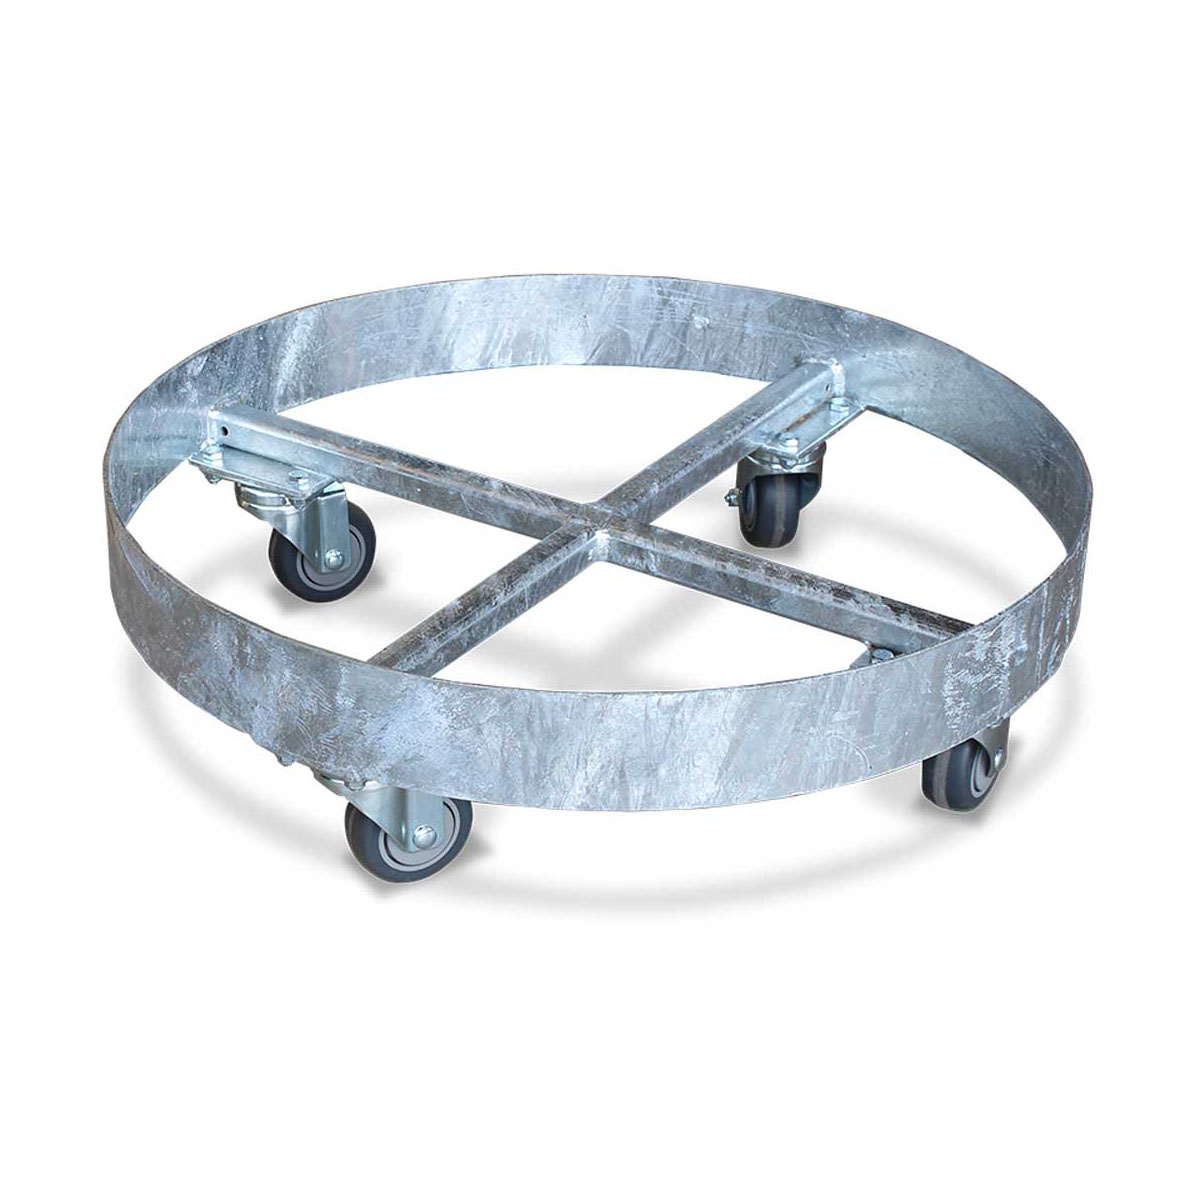 Buy Drum Dolly (Galvanised) available at Astrolift NZ